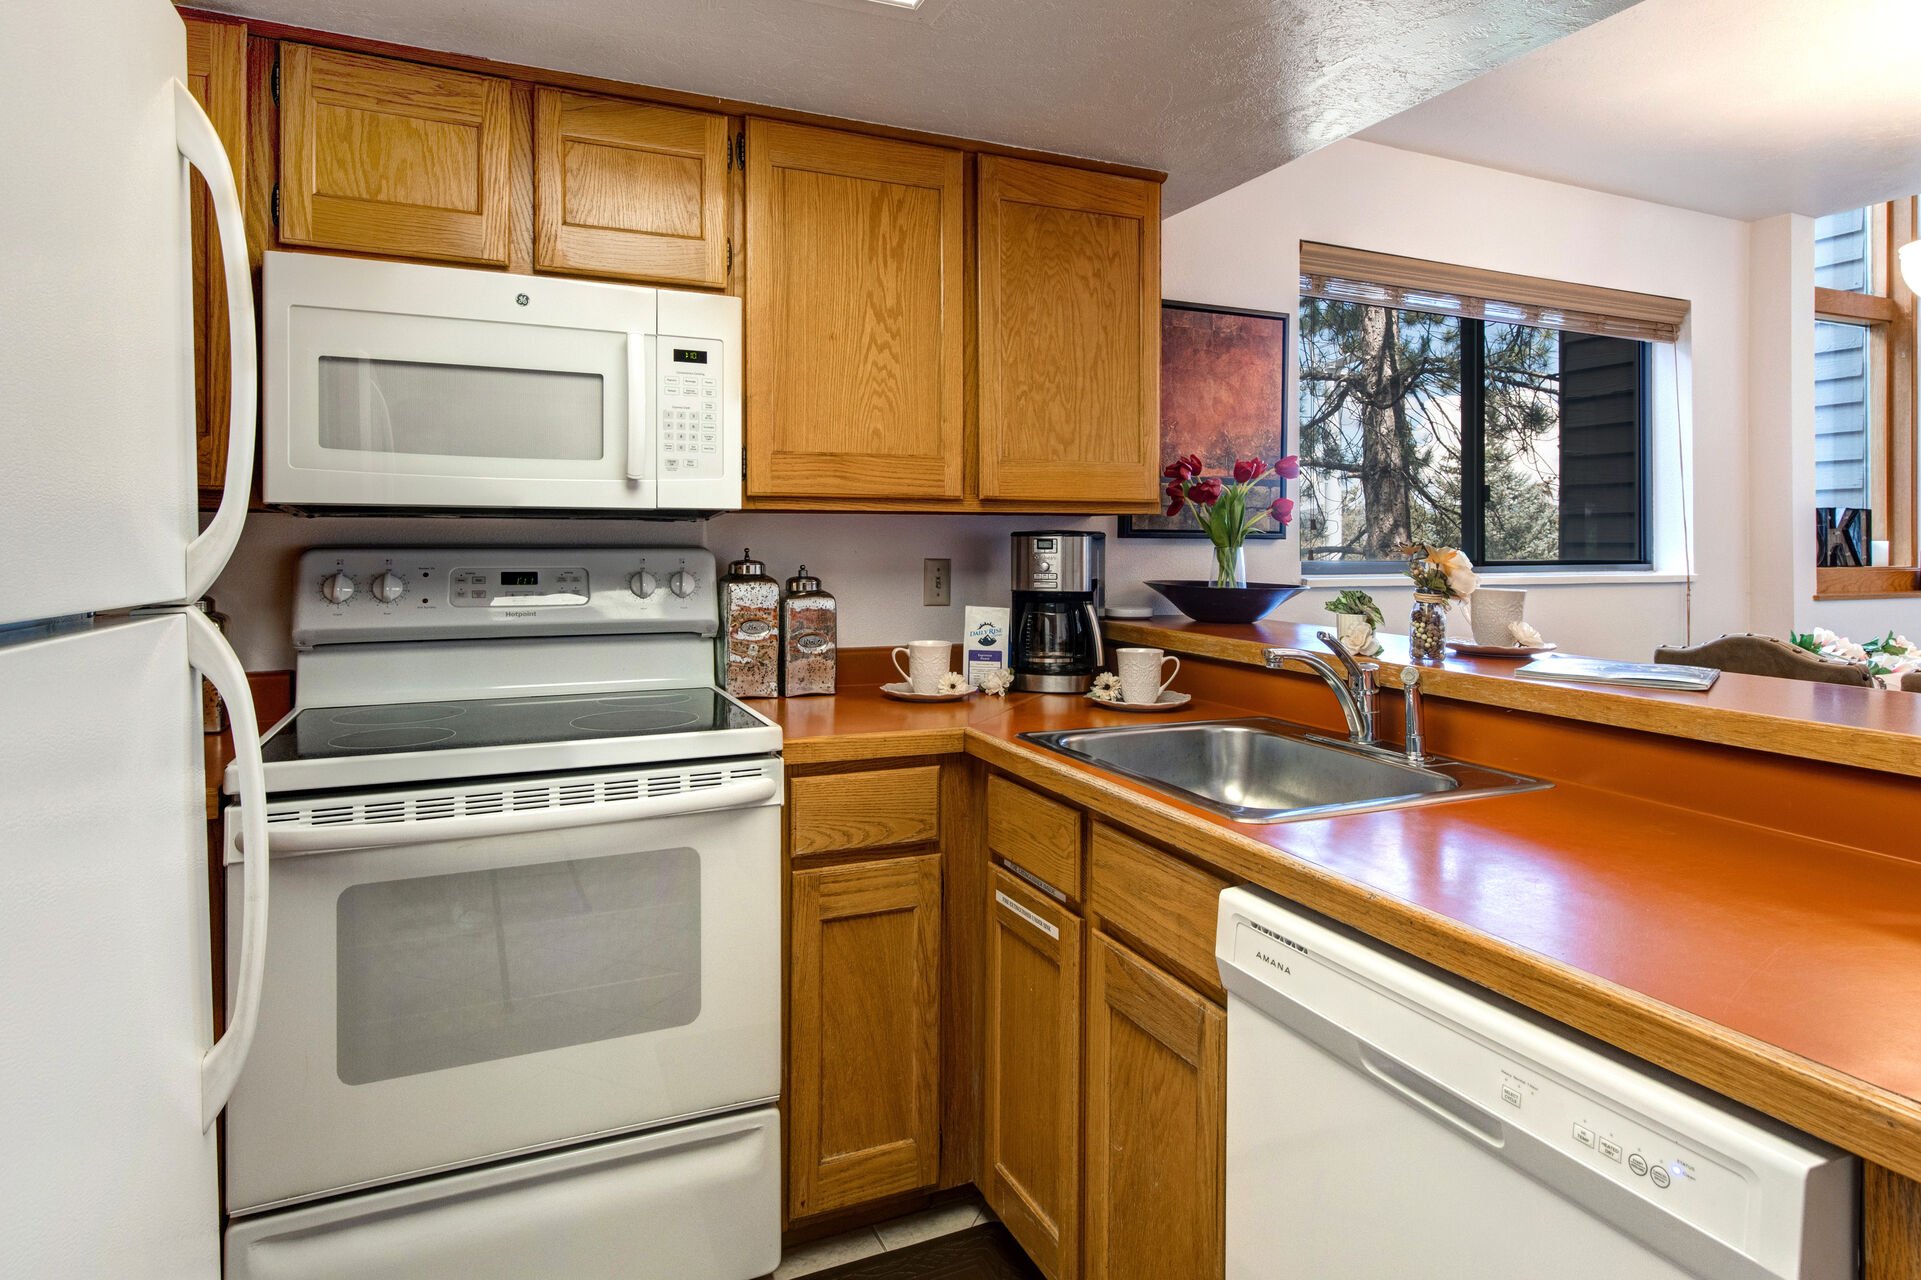 Fully Equipped Kitchen with updated appliances and bar seating for three